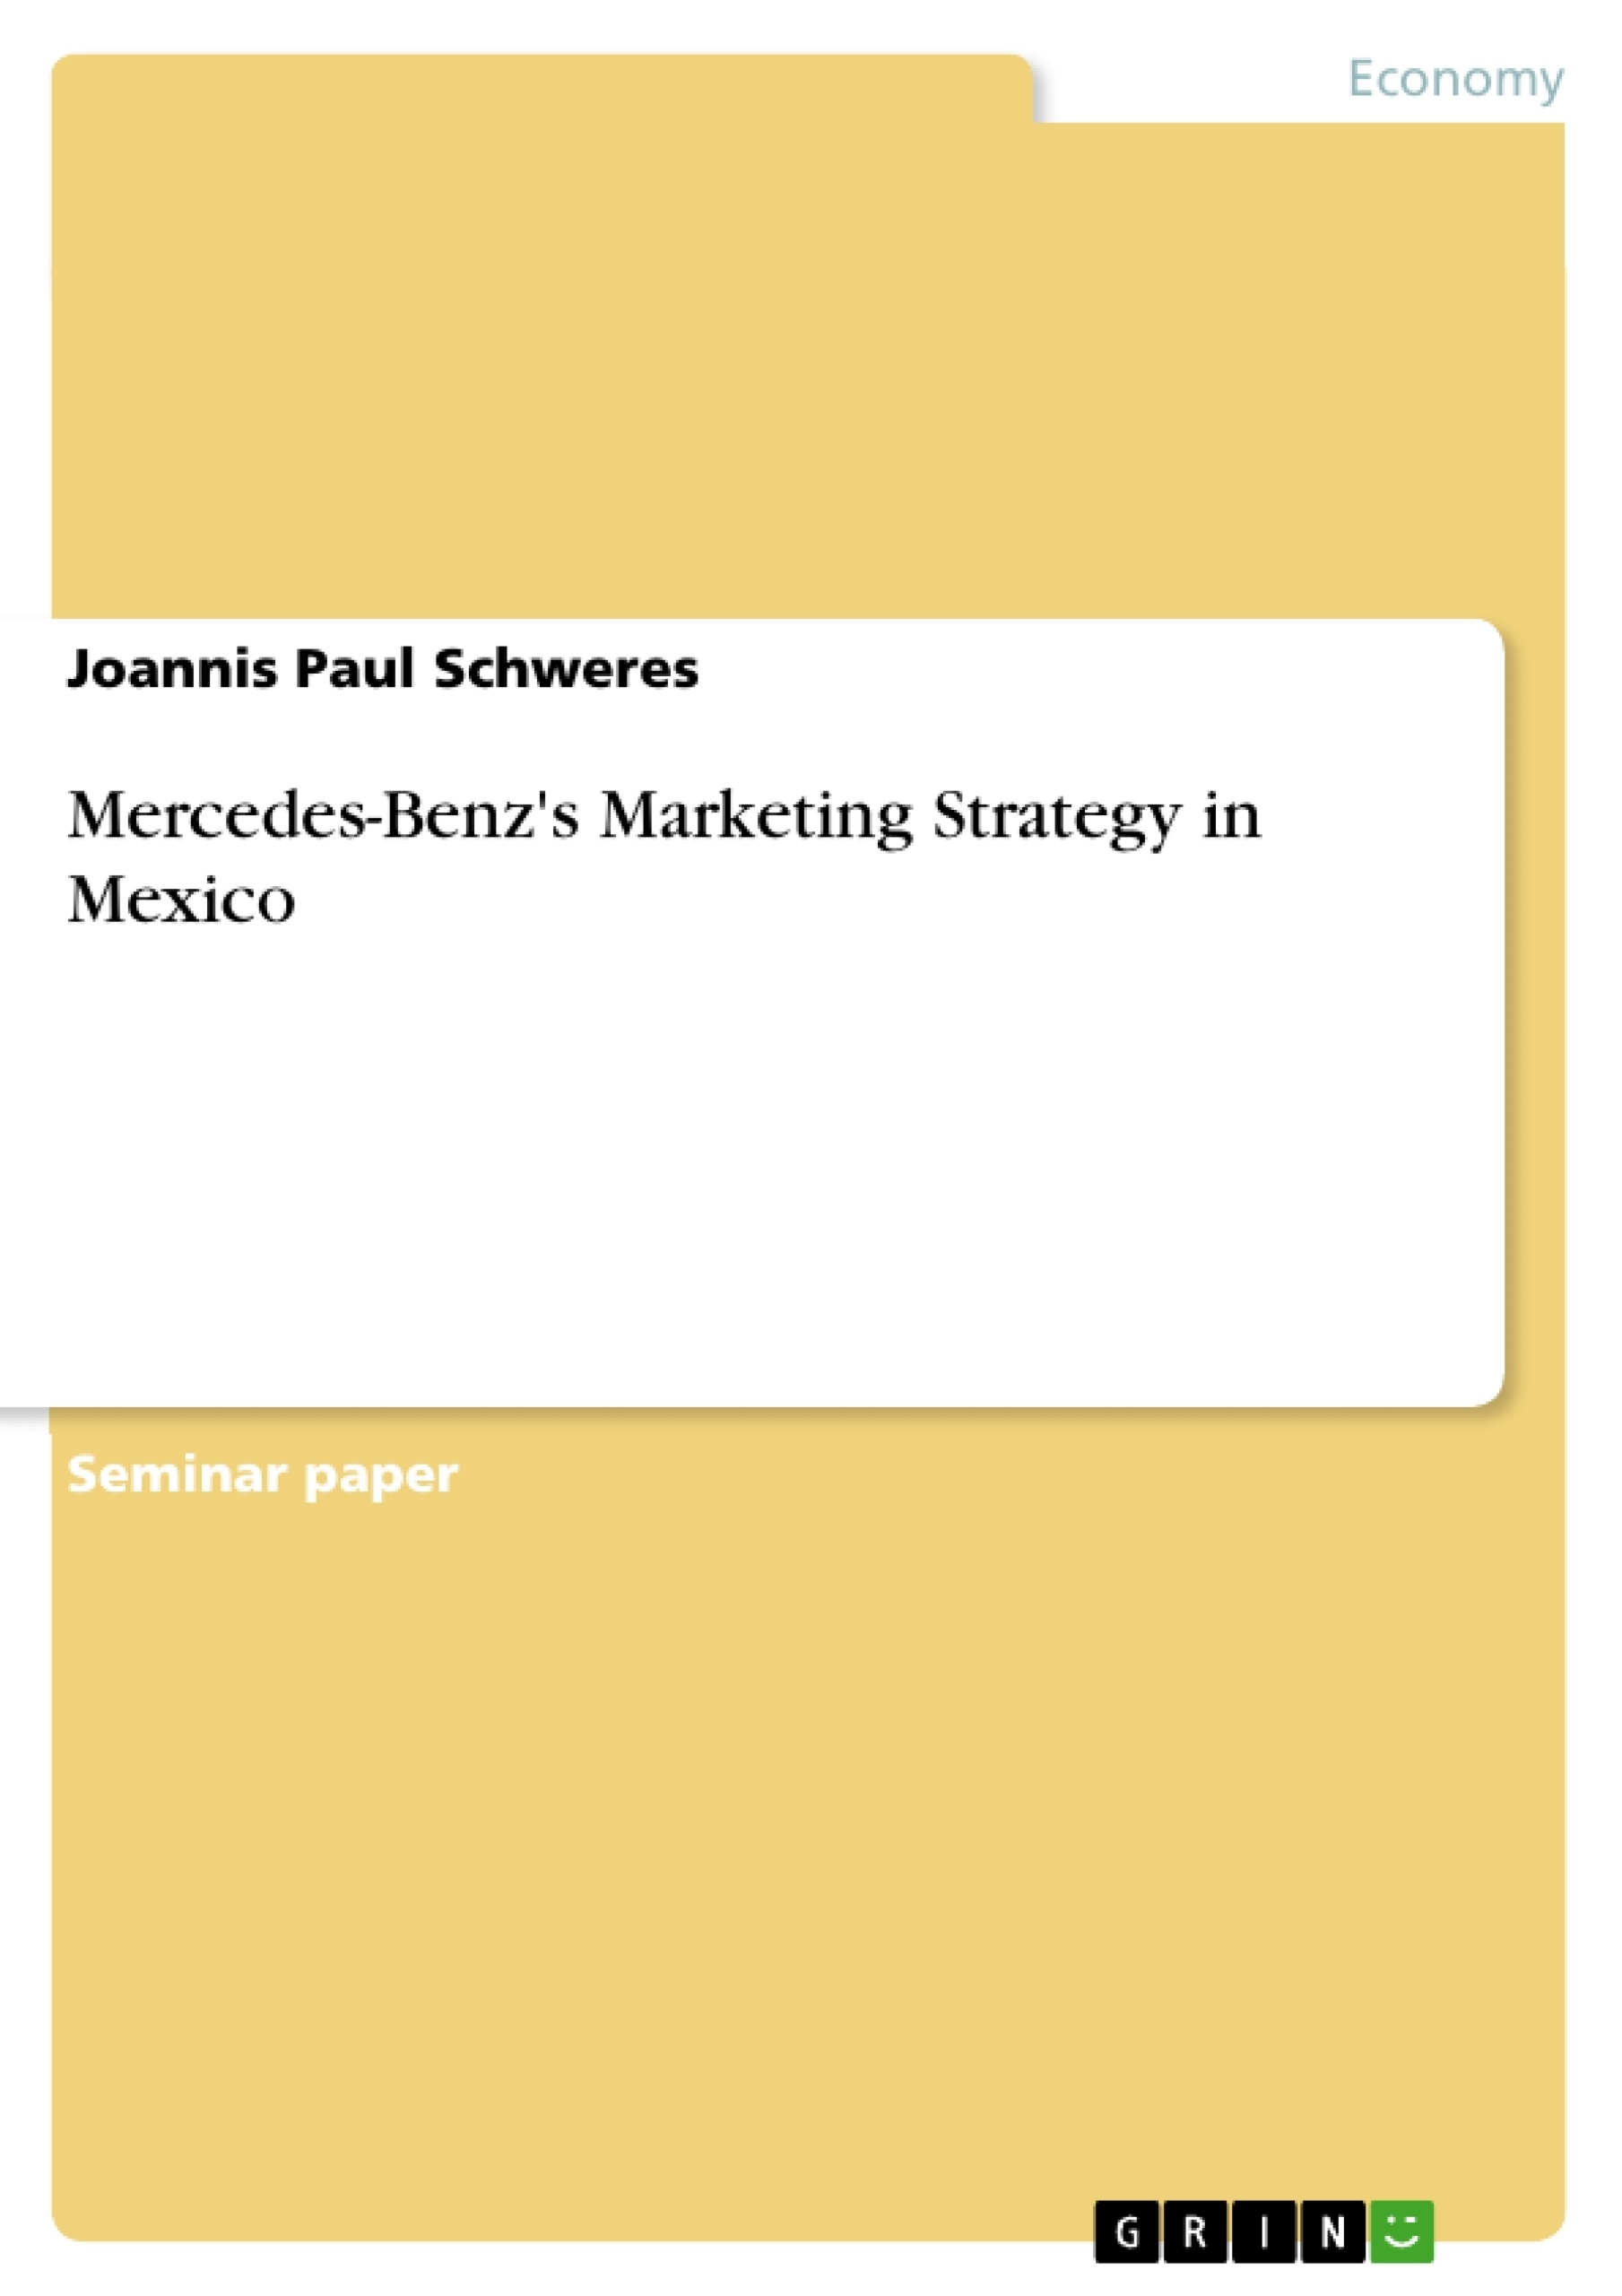 Title: Mercedes-Benz's Marketing Strategy in Mexico